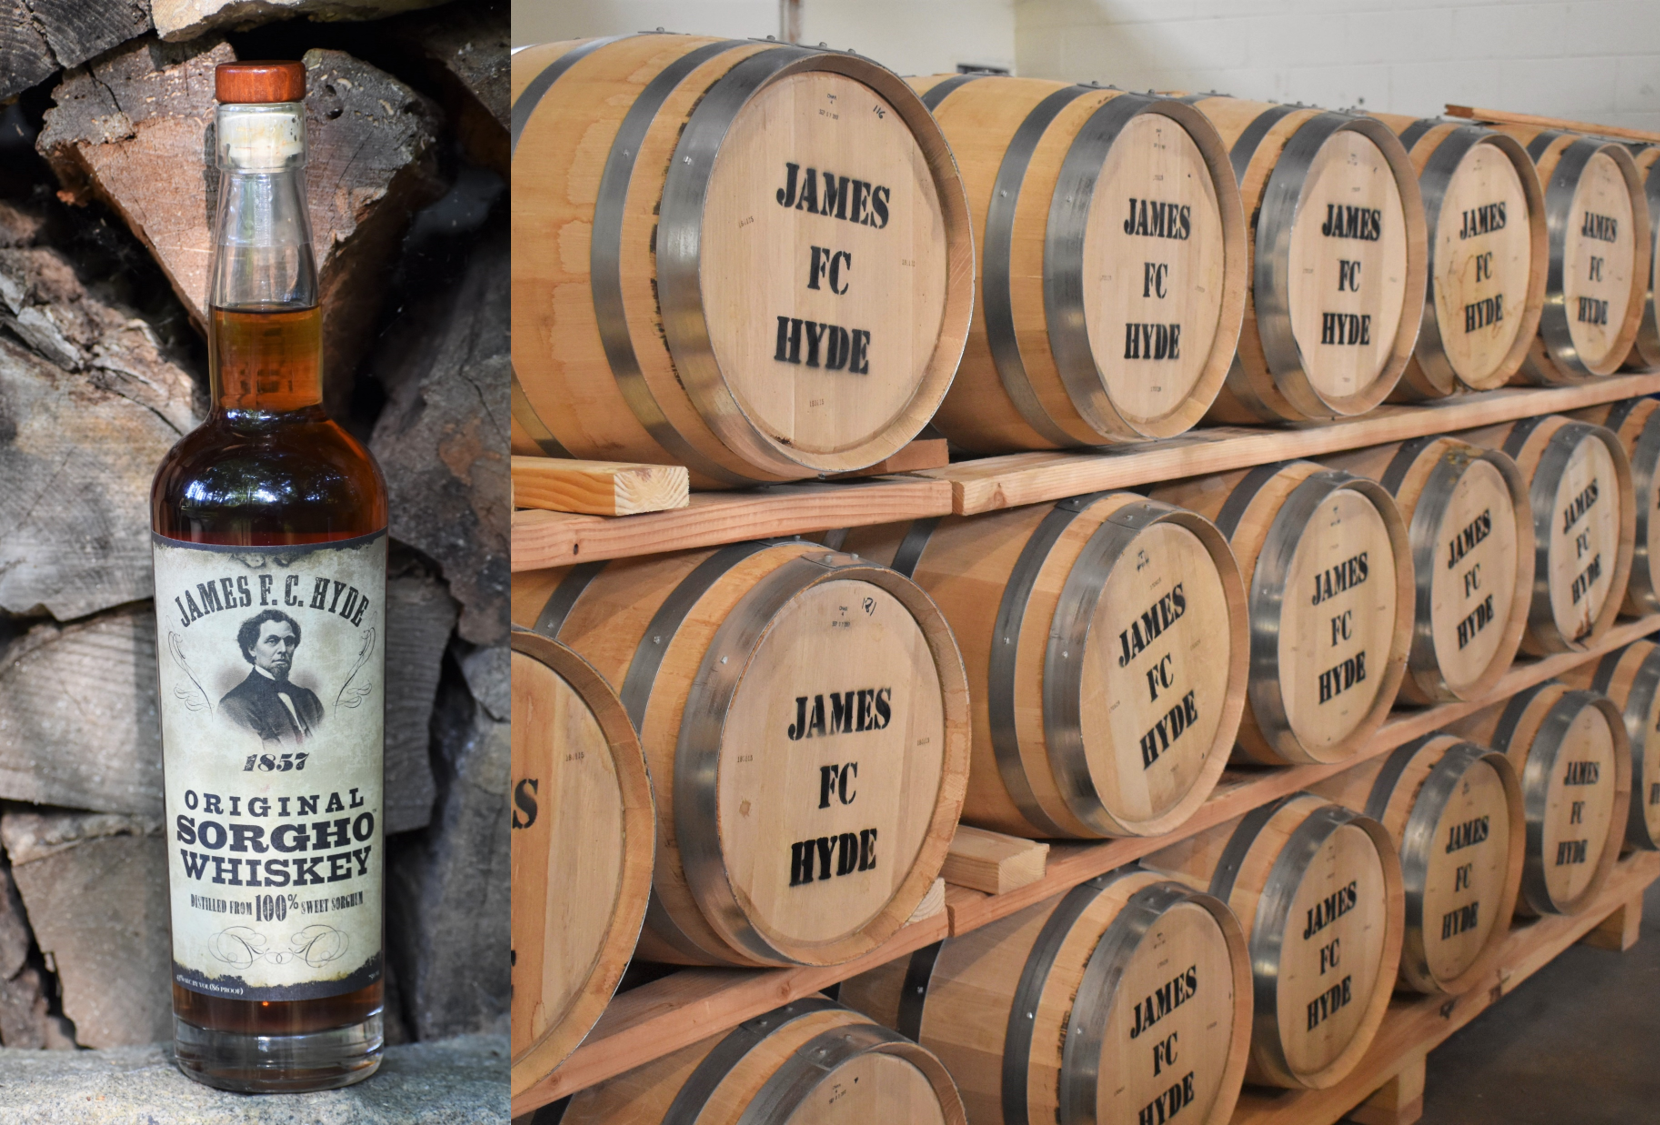 James Hyde: the only 100% whiskey made of Sorghum